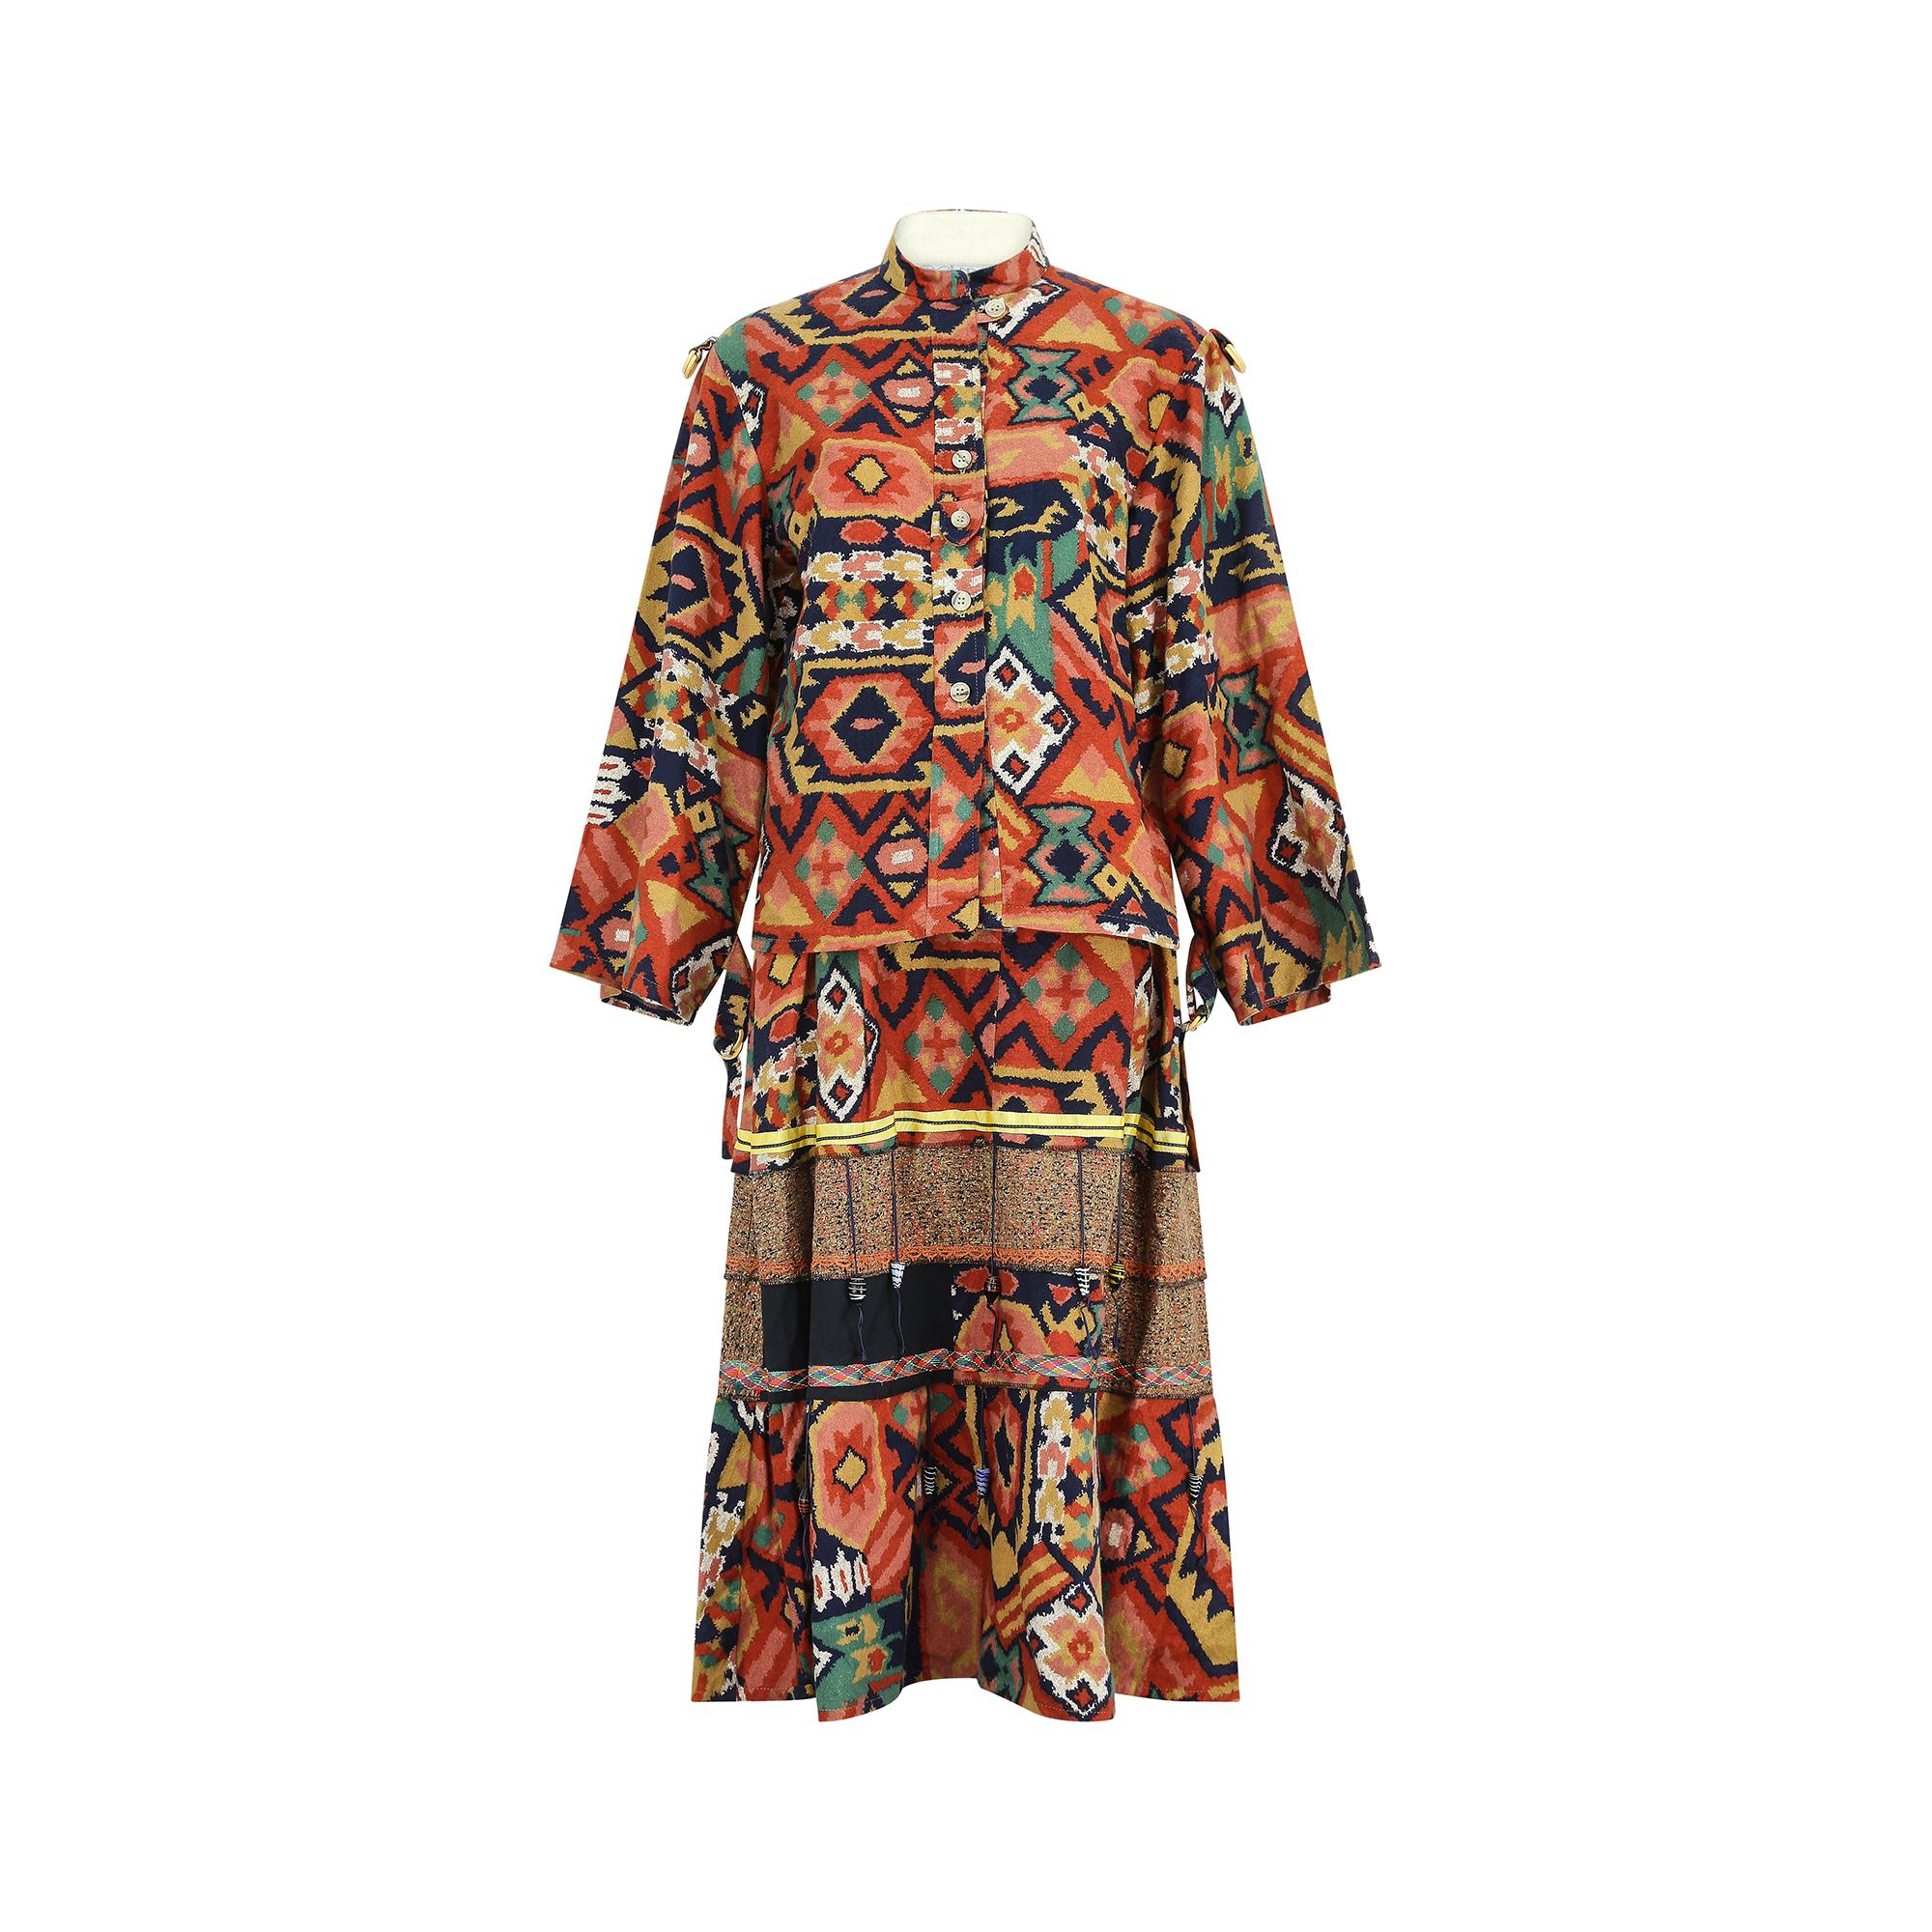 This coordinating skirt and jacket was designed by Janet Moira, a short lived fashion boutique in Covent Garden in the late 1970s to early 1980s. It is tailored from soft, pure cotton flannel in a vibrant multi-hued print. A lightweight button-up